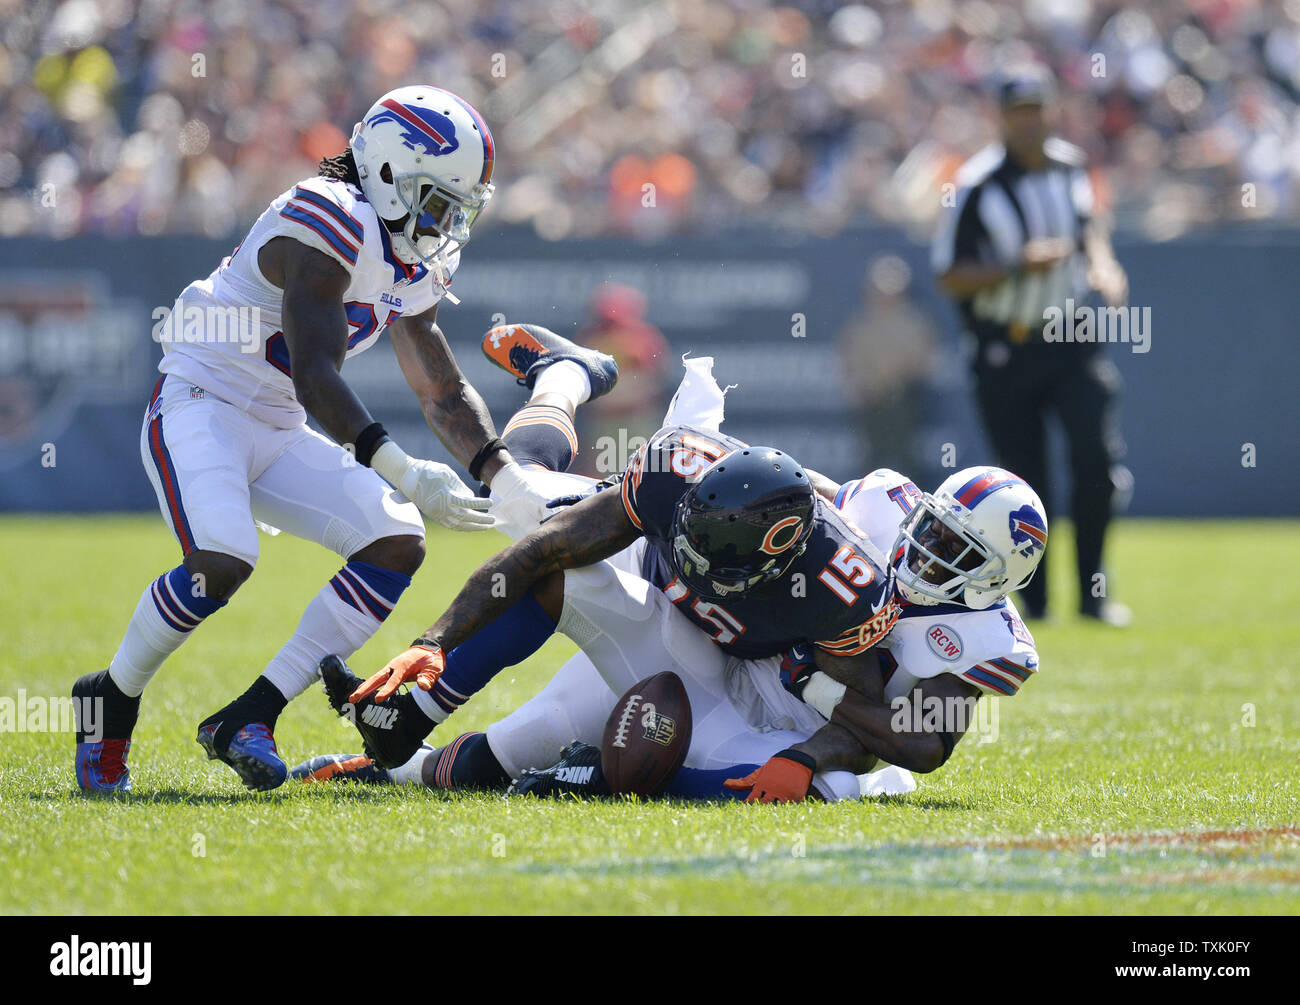 Buffalo Bills cornerback Leodis McKelvin (R) strips the ball from Chicago Bears wide receiver Brandon Marshall (C) as defensive back Nickell Robey helps out during the second quarter at Soldier Field on September 7, 2014 in Chicago. The Bills recovered the fumble.     UPI/Brian Kersey Stock Photo